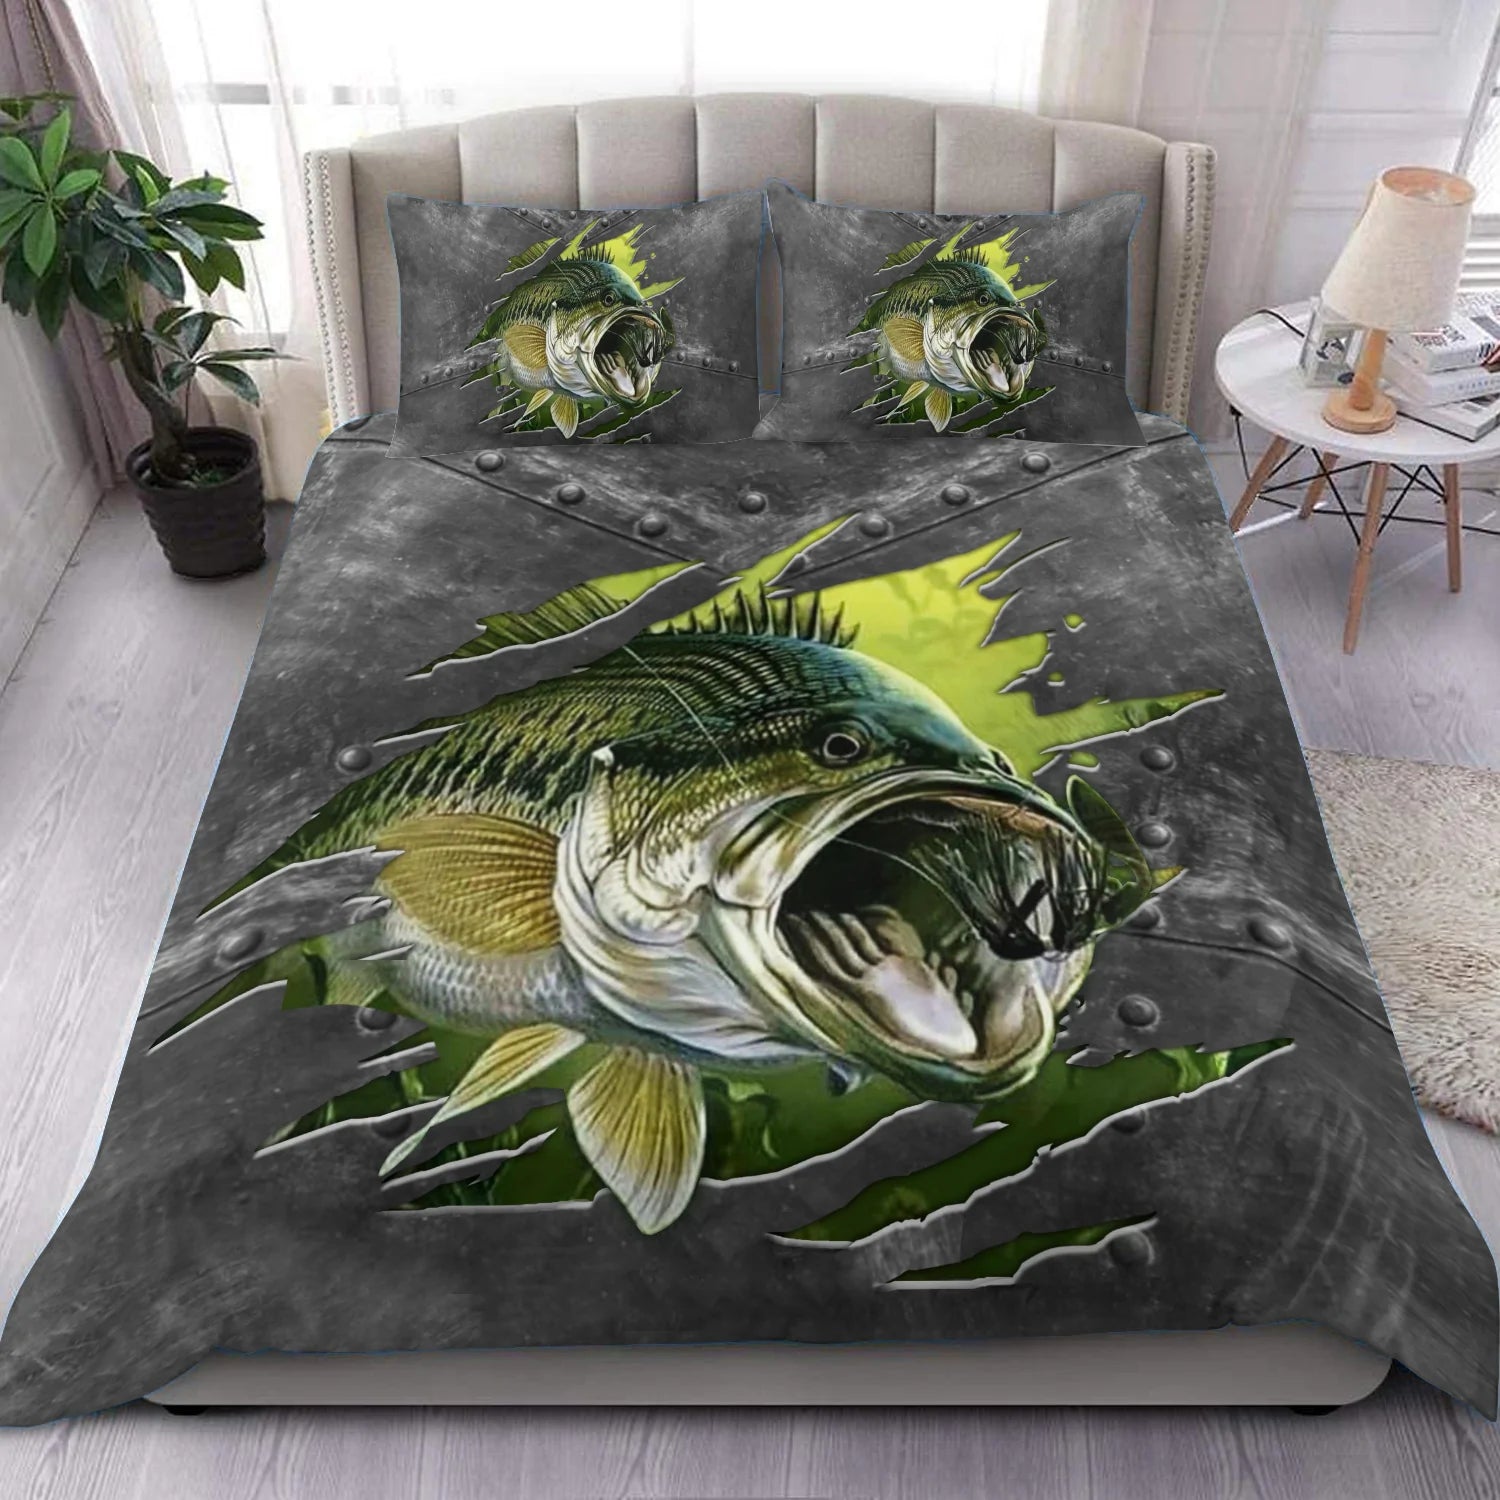 3D Fishing Bedding Set 3-piece, Gift for Fishing Lovers - PF10278